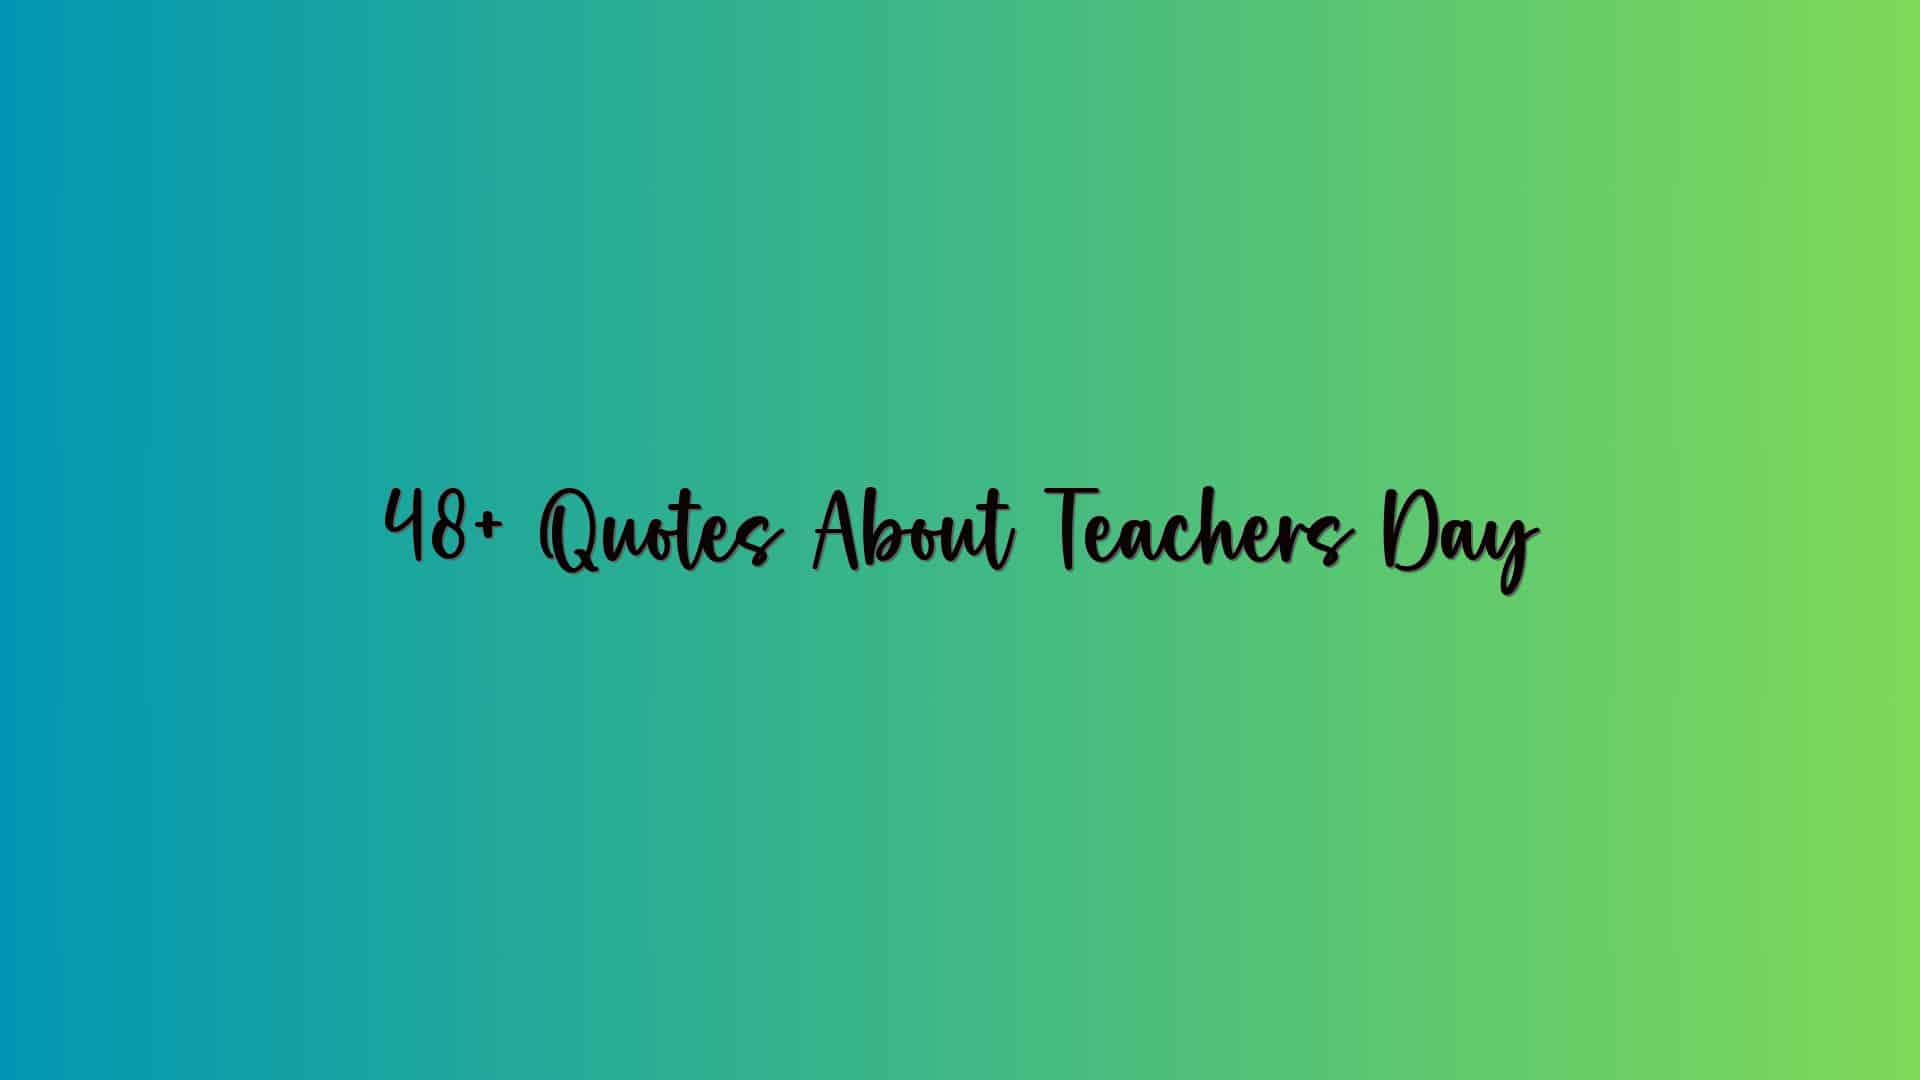 48+ Quotes About Teachers Day